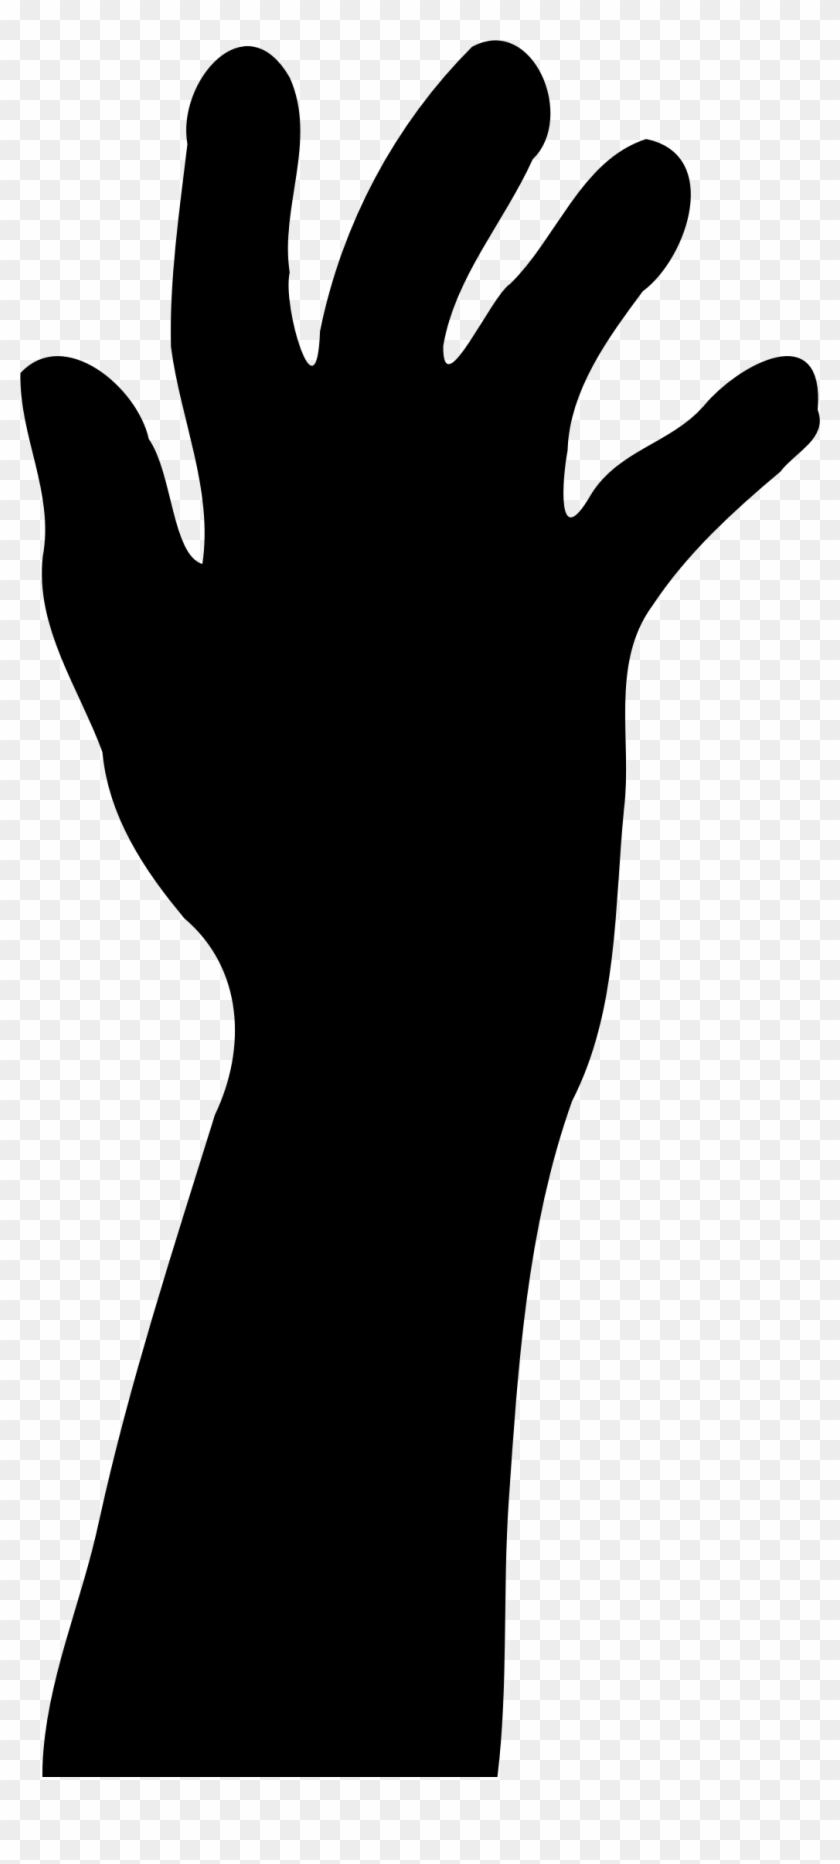 Clipart - Hand Silhouette Png #261577